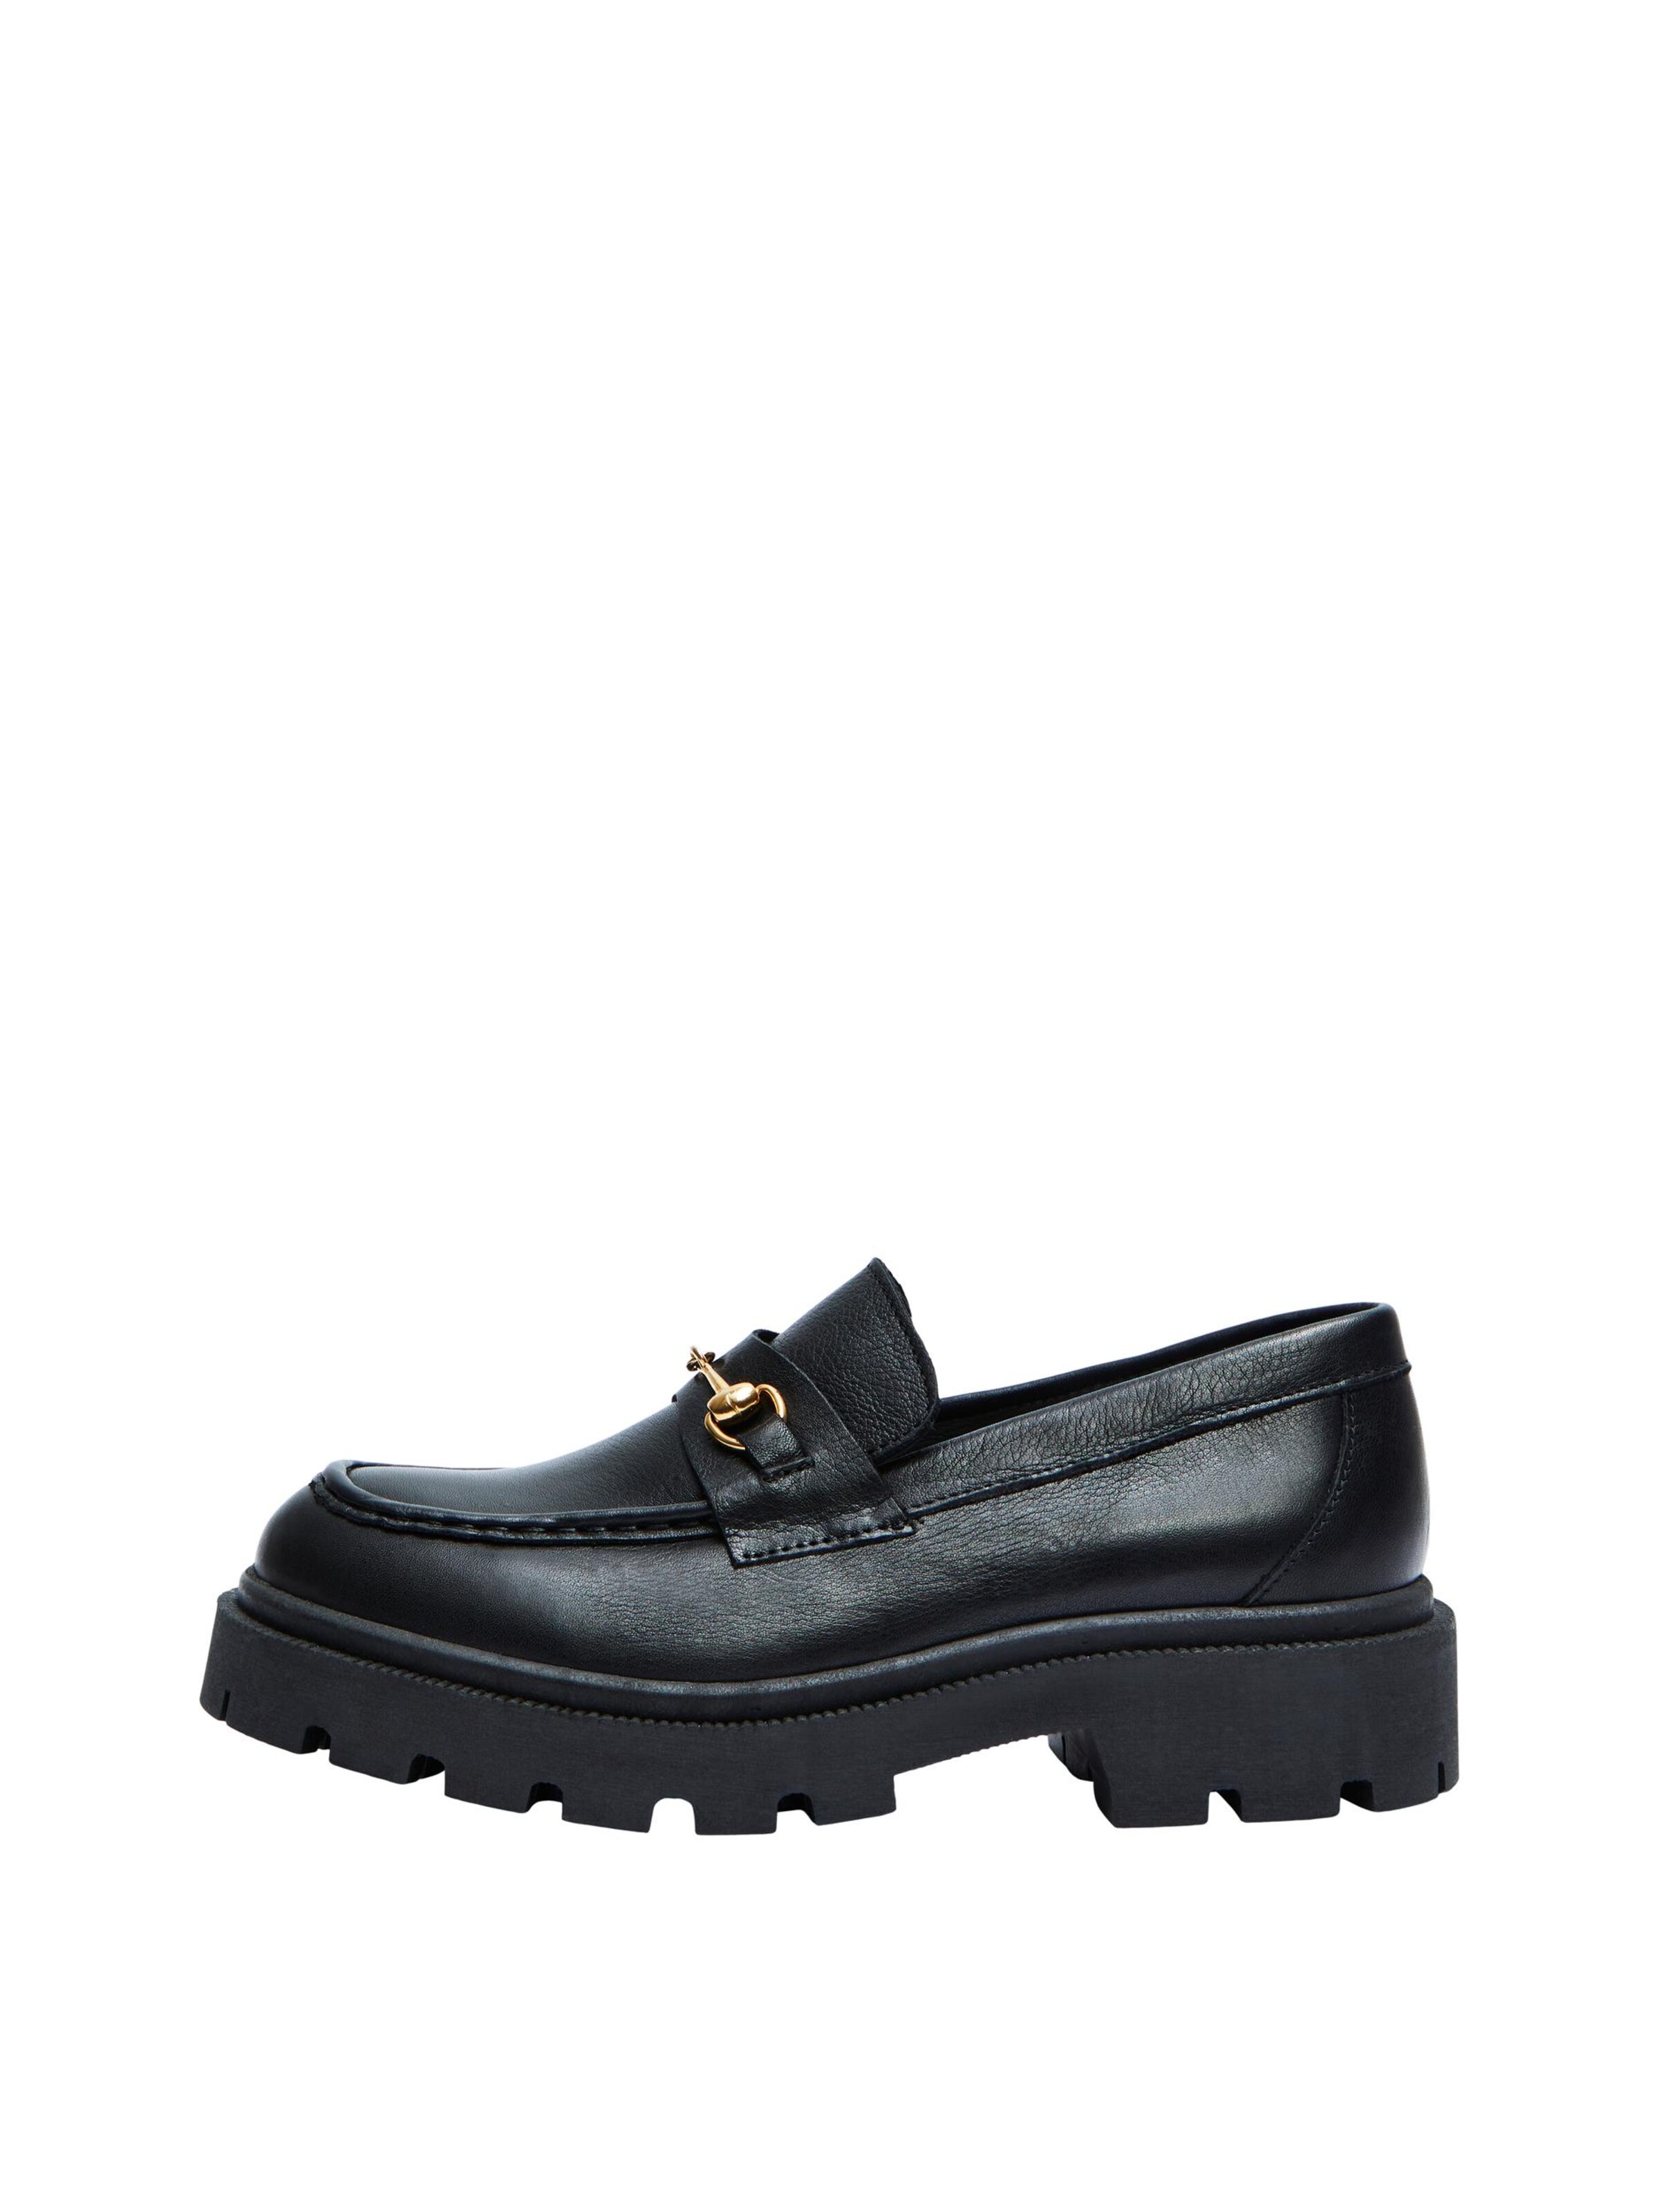 Donna qJboW SELECTED FEMME Slipper Emma in Nero 